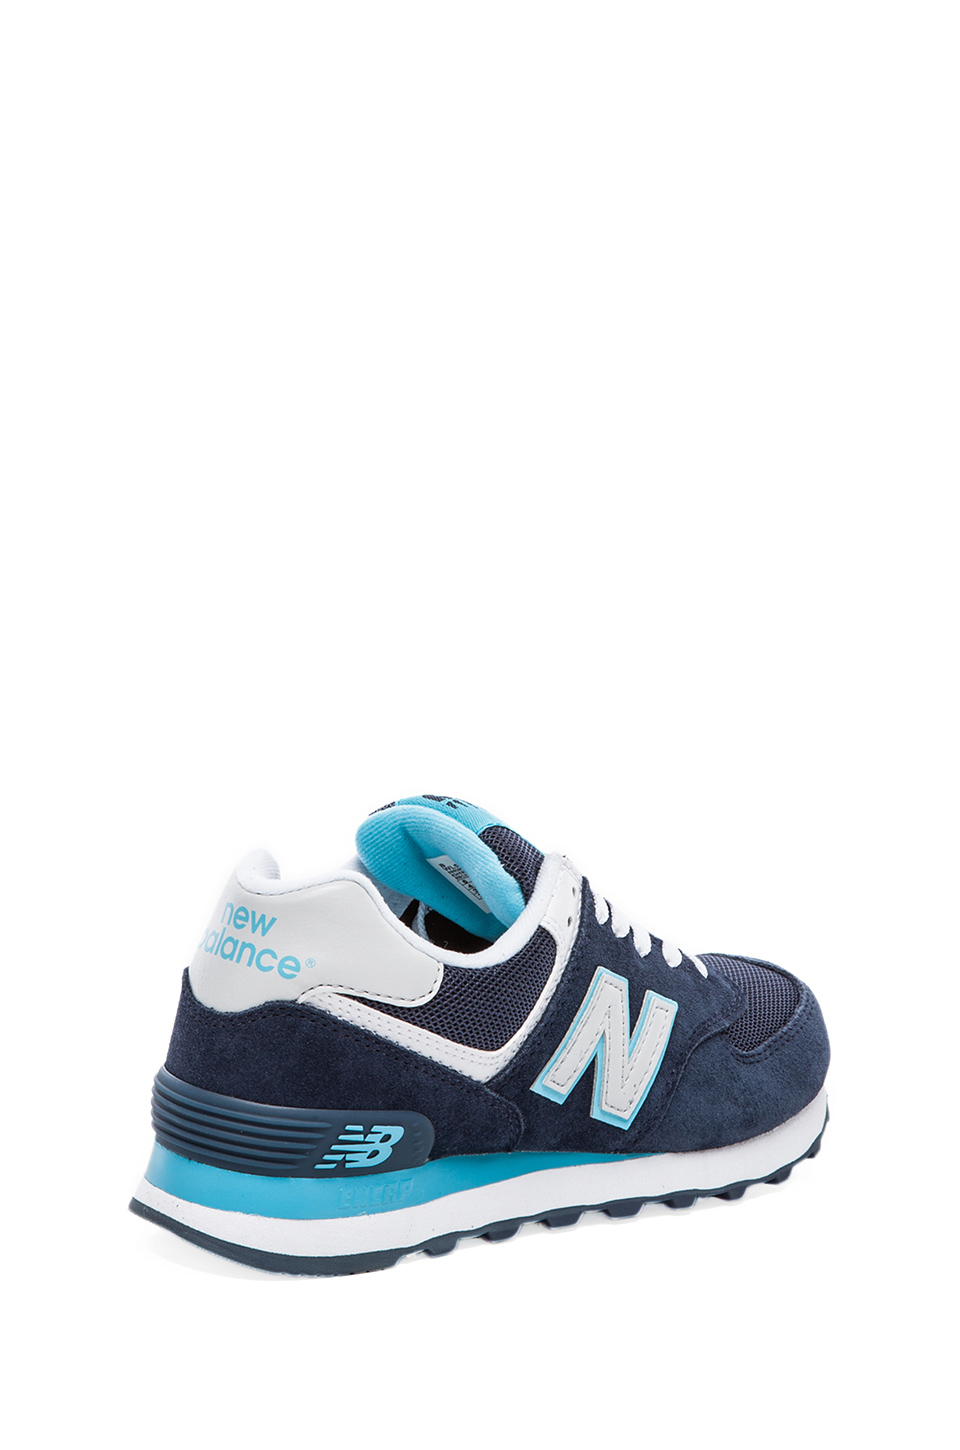 New Balance Core Plus Collection Sneaker in Blue - Lyst